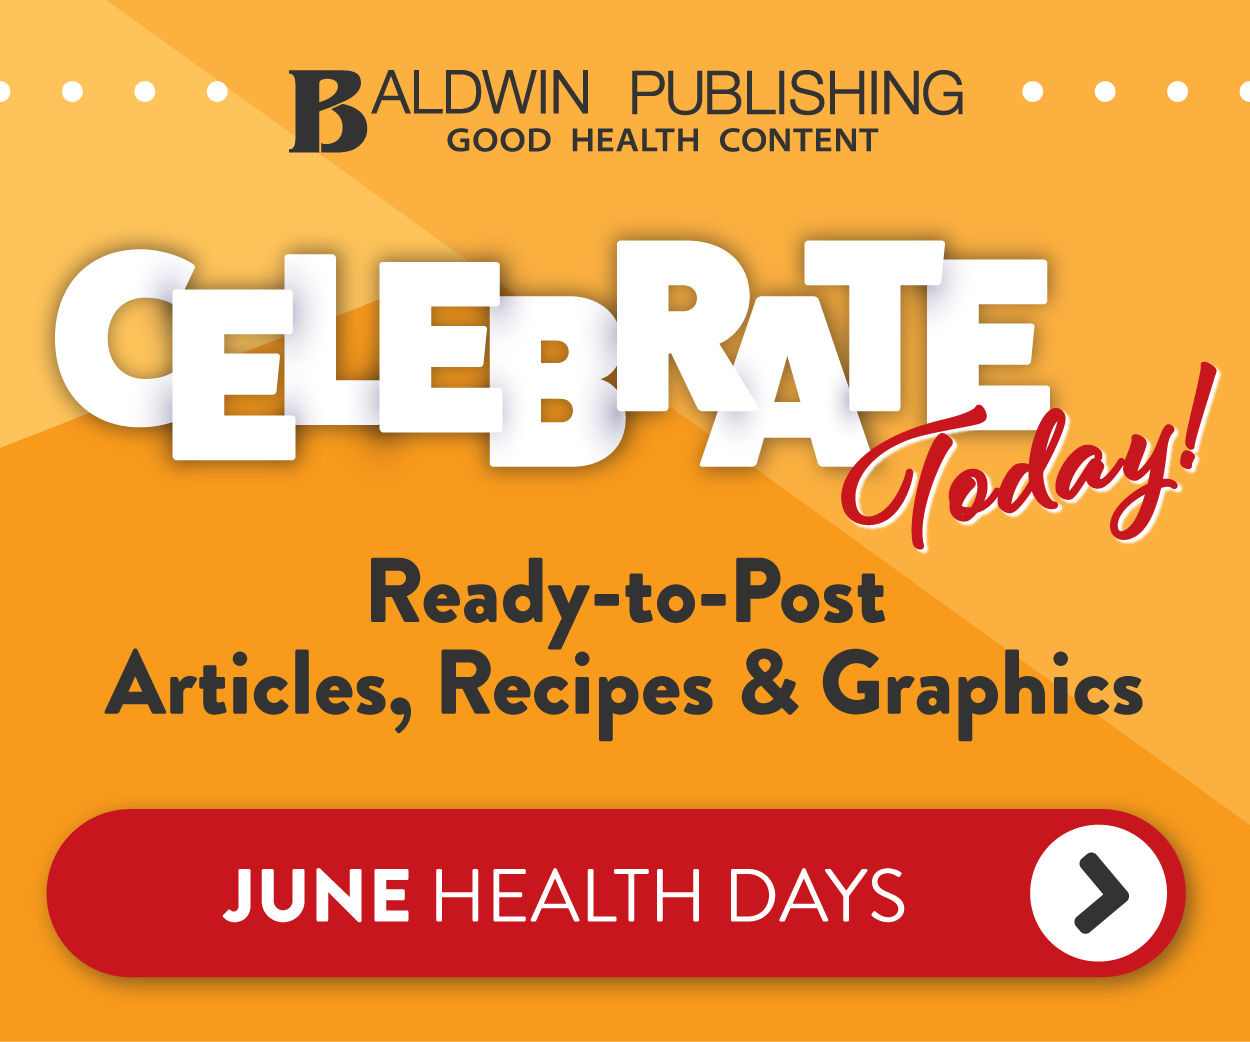 Baldwin Publishing - Celebrate Today, See All June Health Days